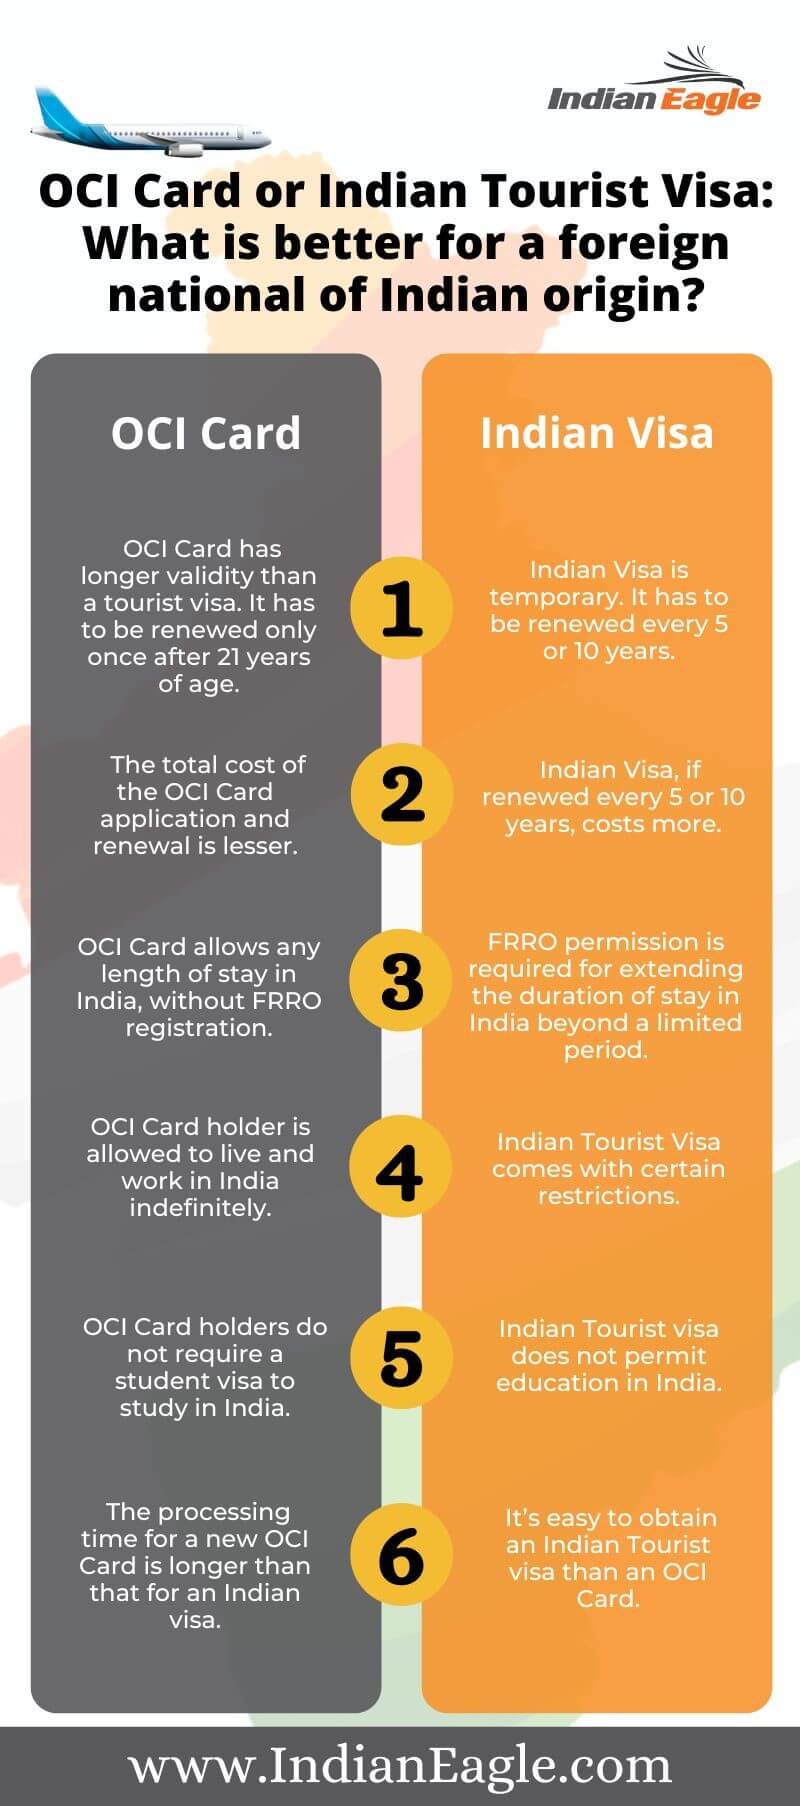 How long you can stay in India with OCI card?